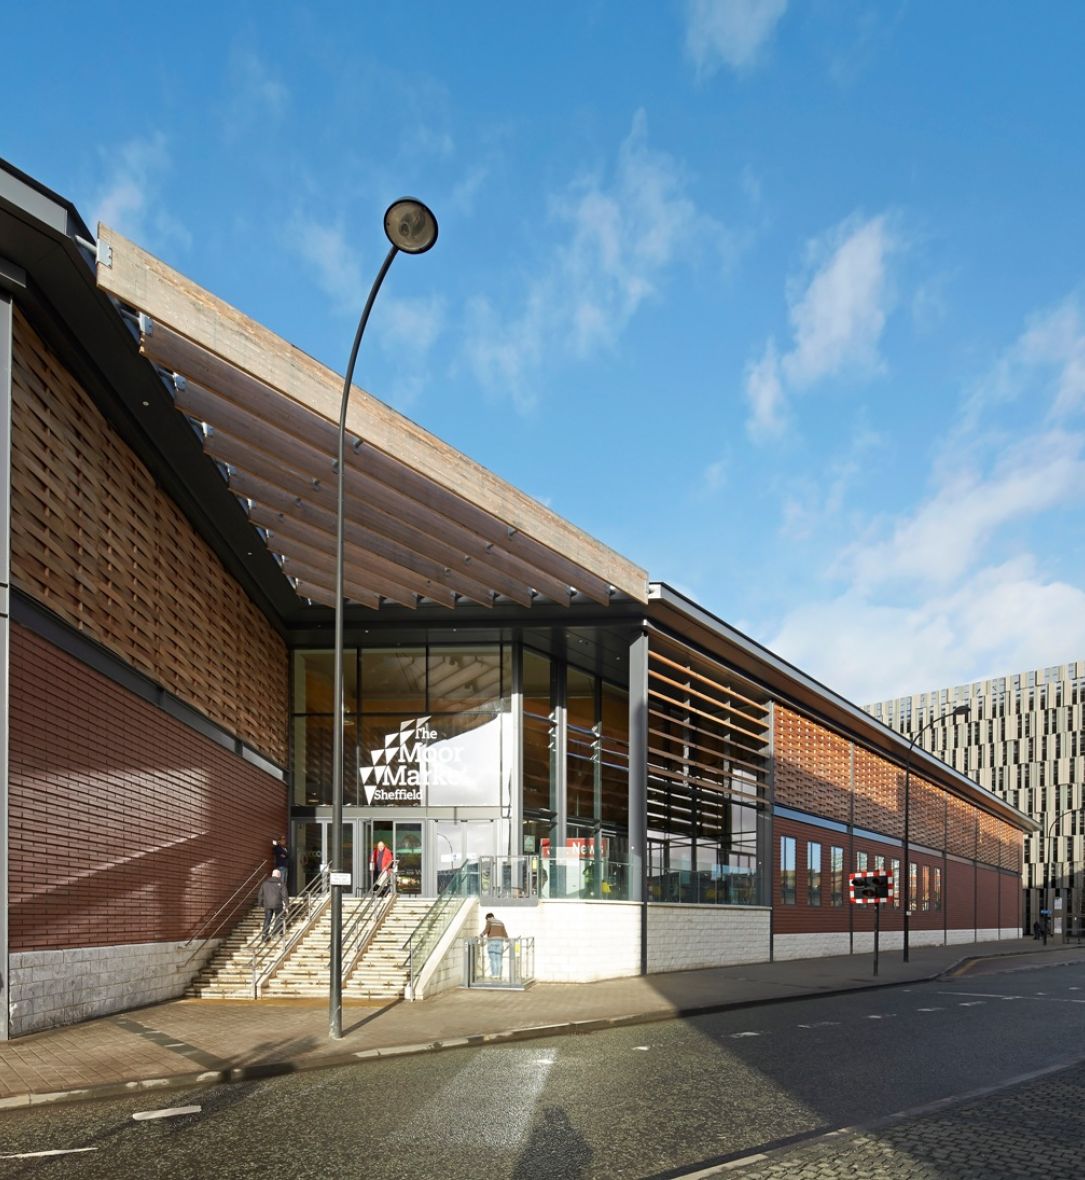 BCL timber cladding panels used at Sheffield Moor Market